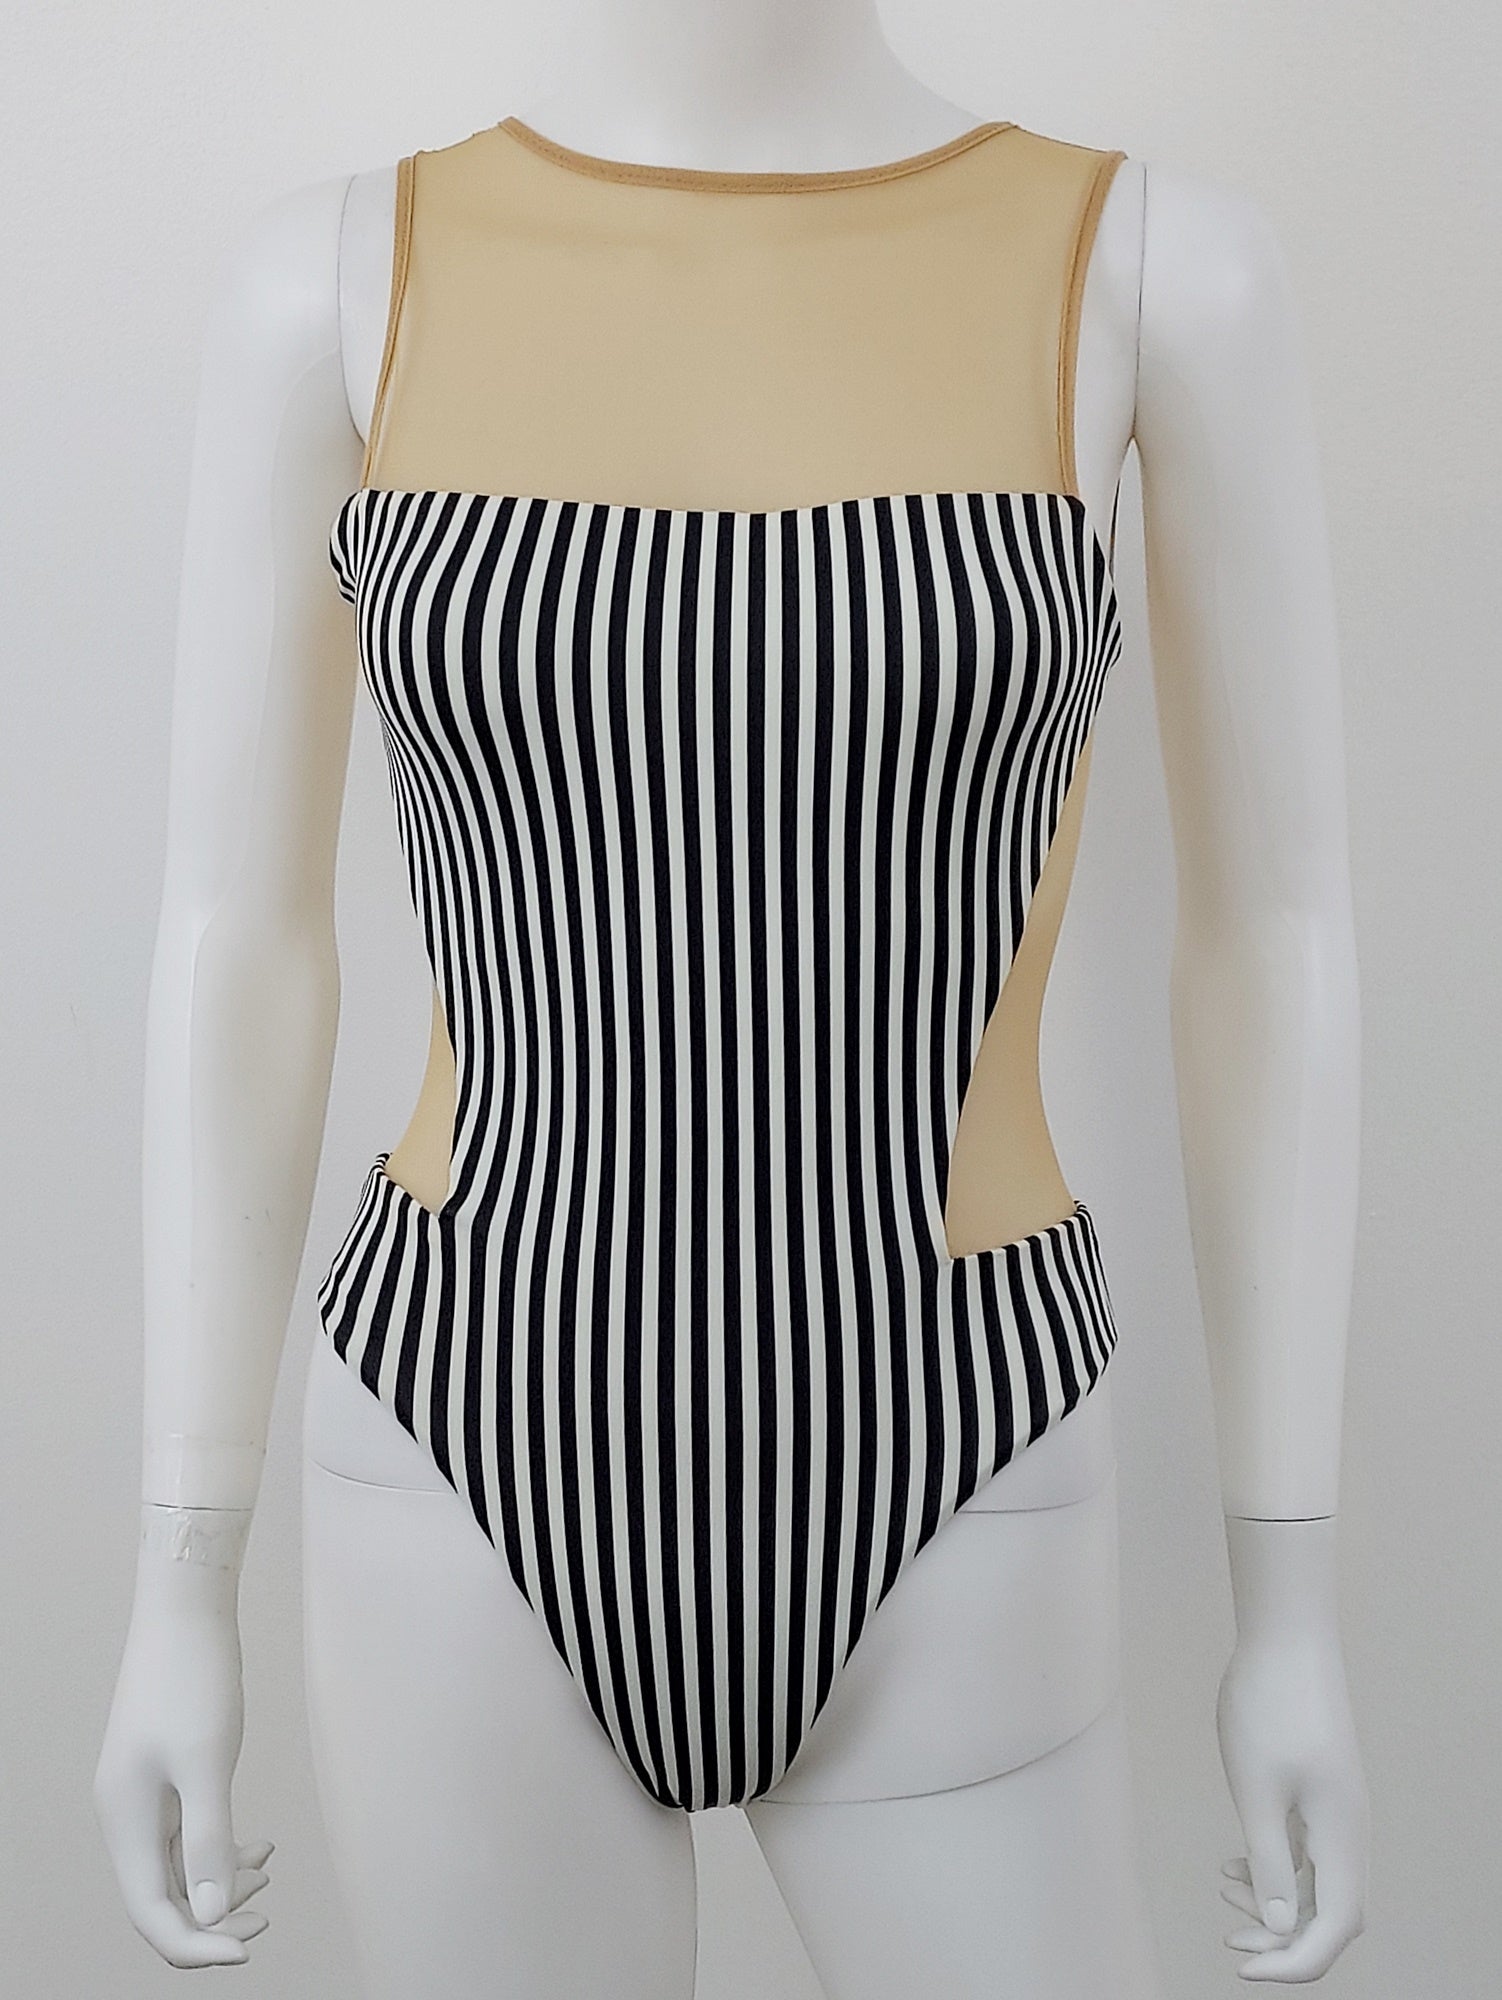 Prude Jude Striped Swimsuit Size XS